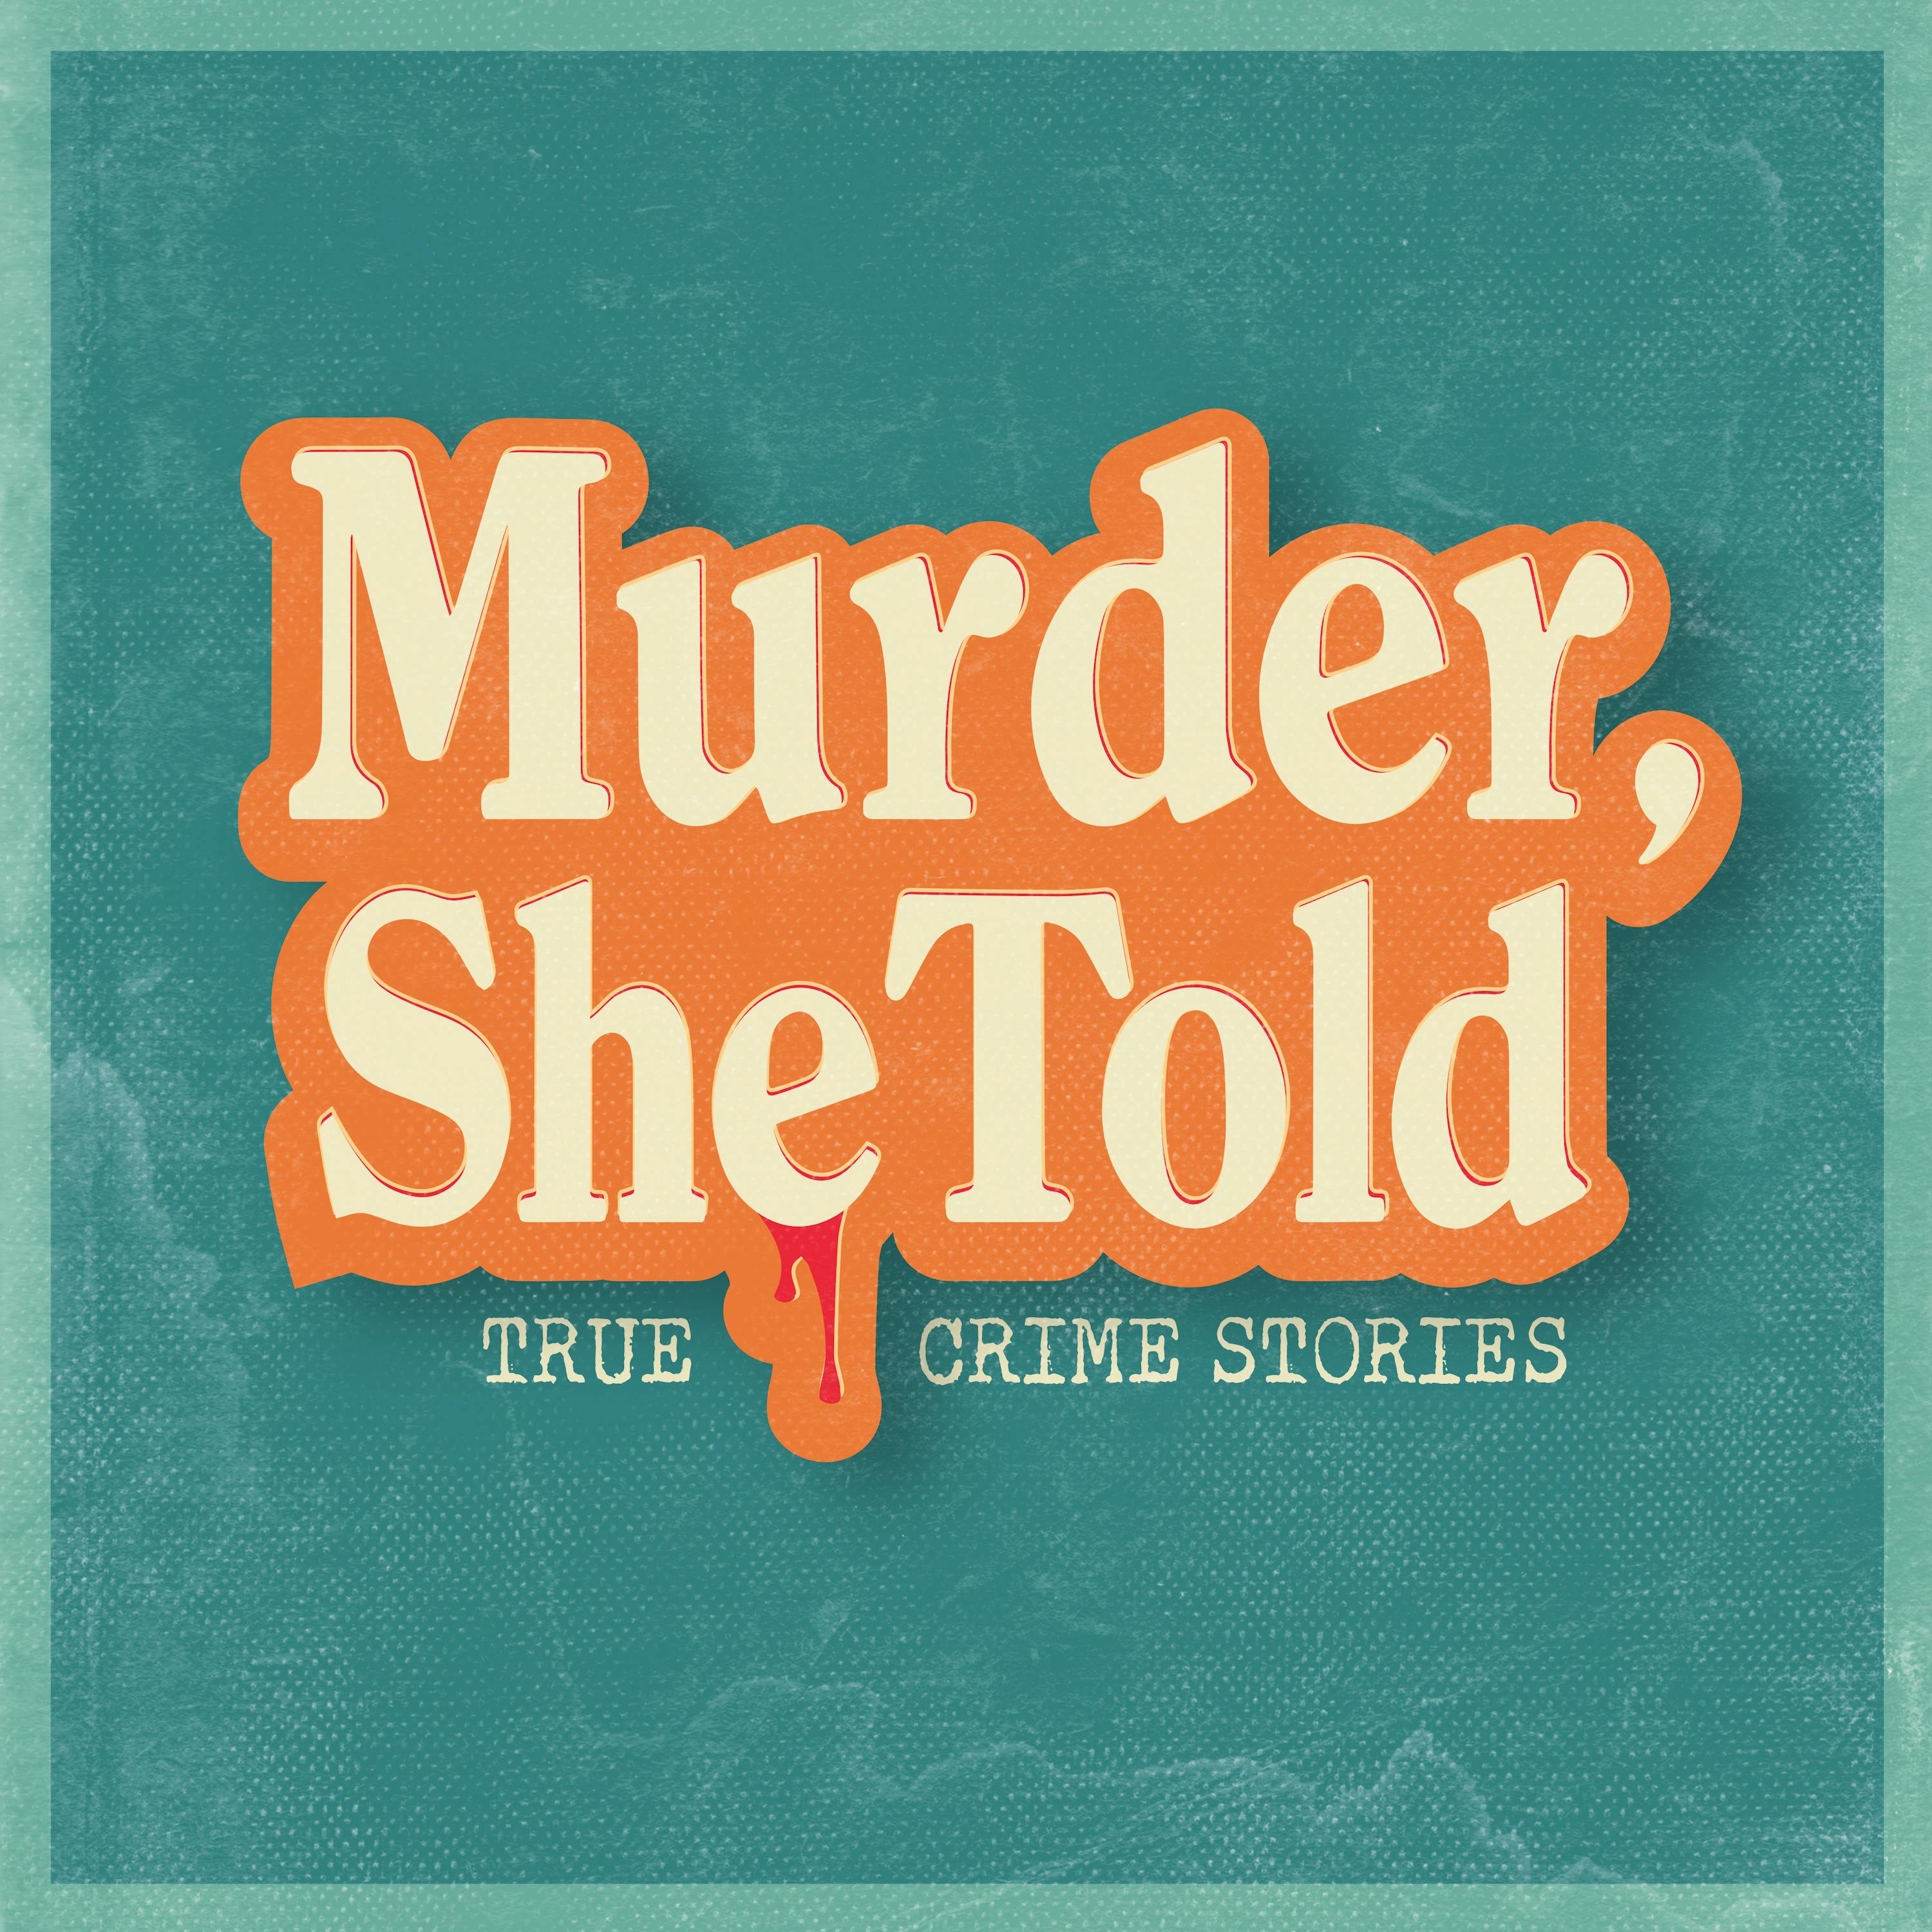 Introducing: MURDER, SHE TOLD